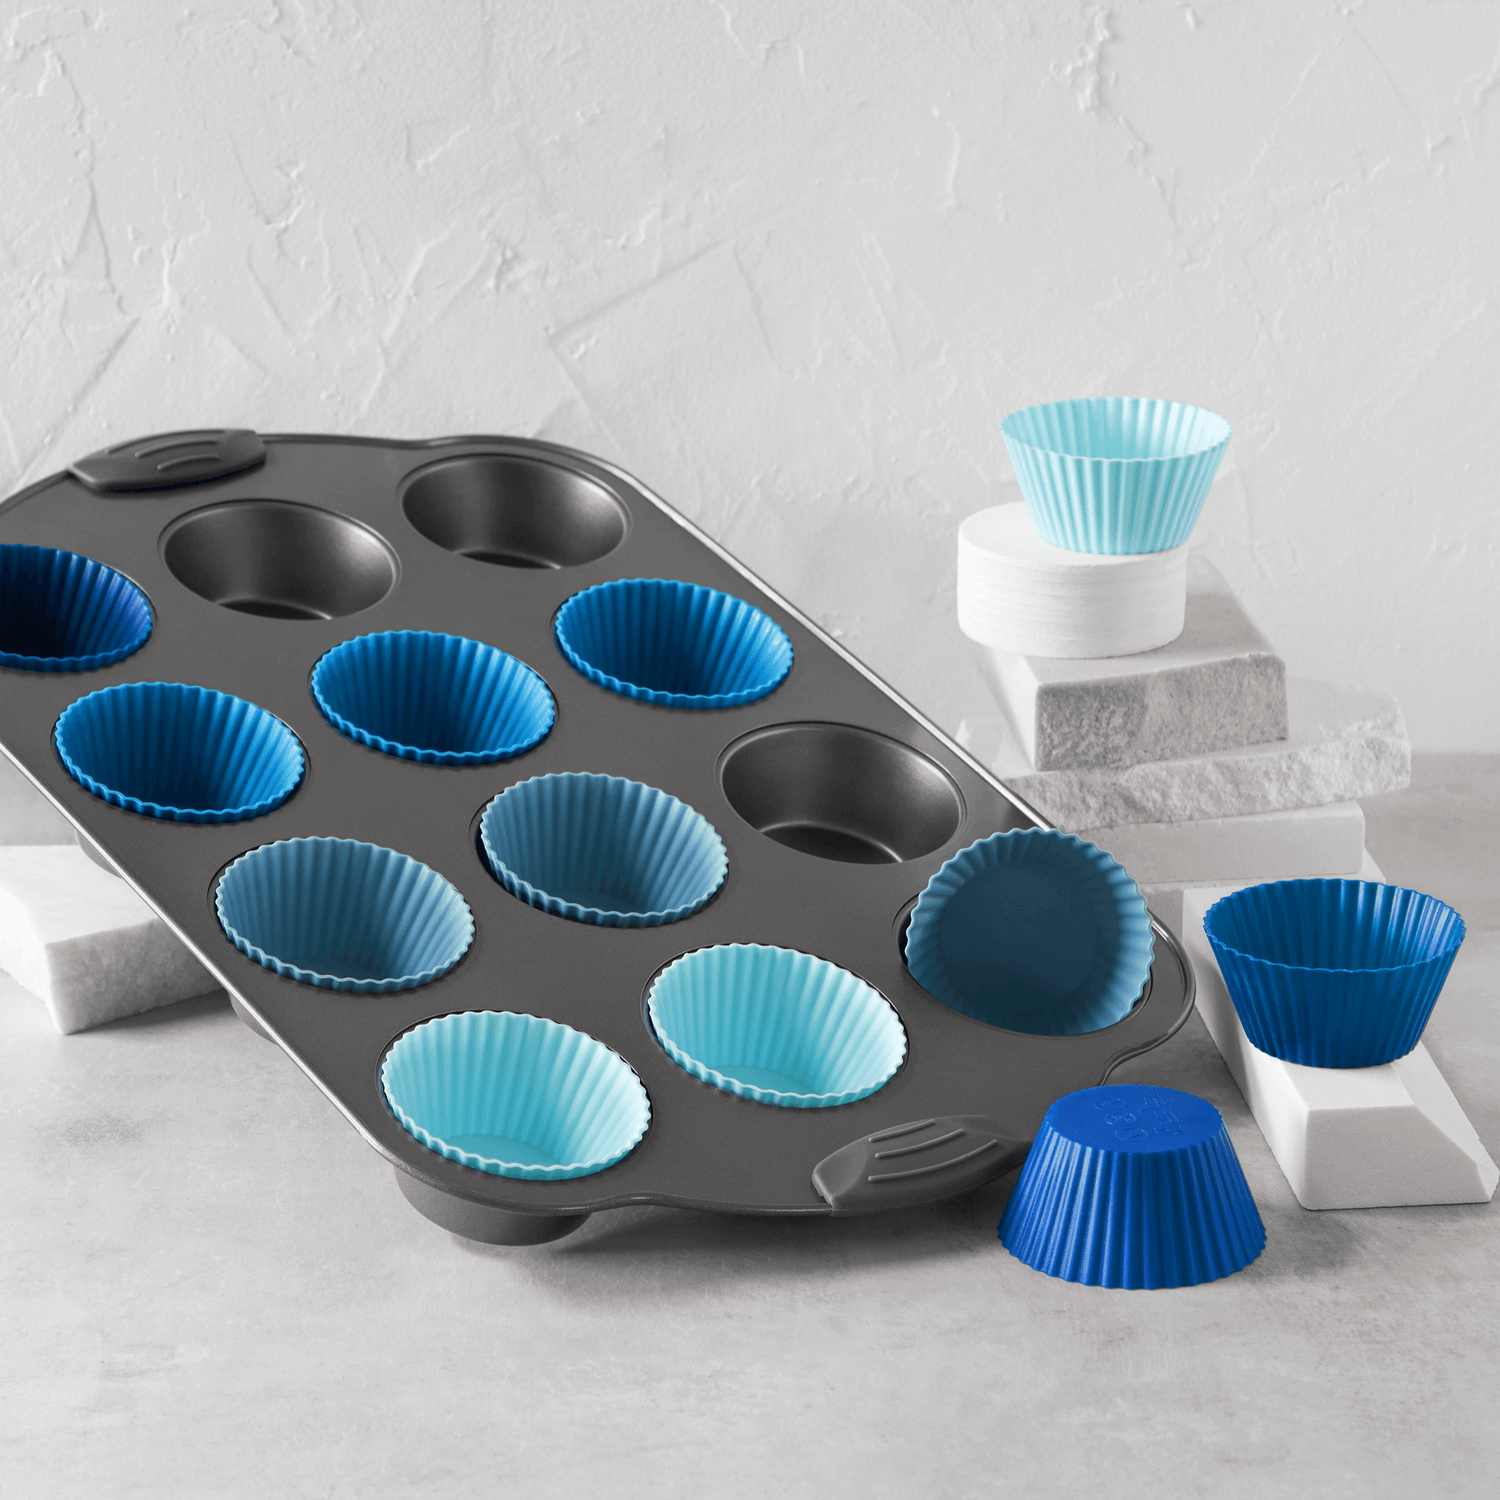 NORDIC WARE 12 CUP MUFFIN PAN - Rush's Kitchen